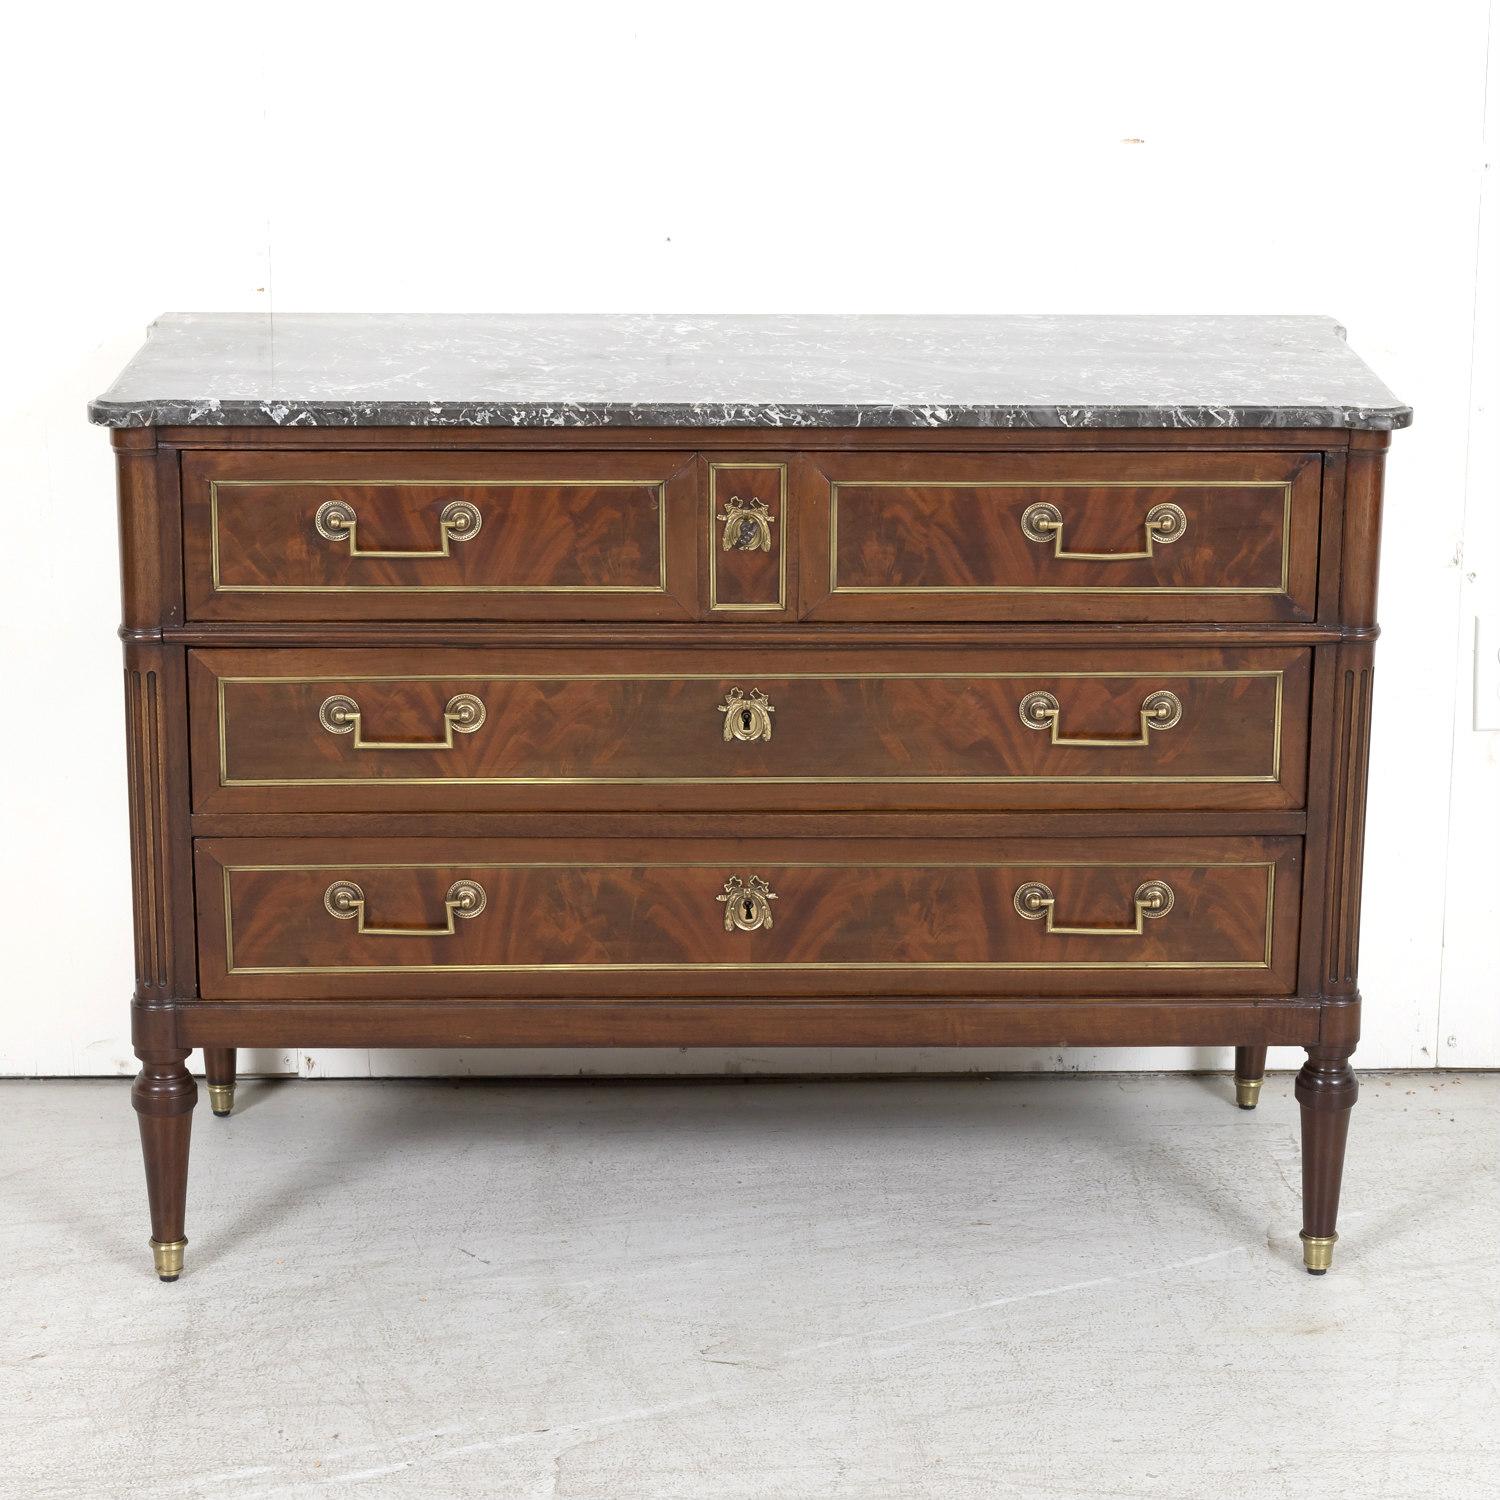 A fine 18th century French Louis XVI period commode de port handcrafted of Cuban mahogany by skilled artisans from the Bordeaux region of France, circa 1770s, having a moulded cookie cutter top of Saint Anne des Pyrenees gray marble above three